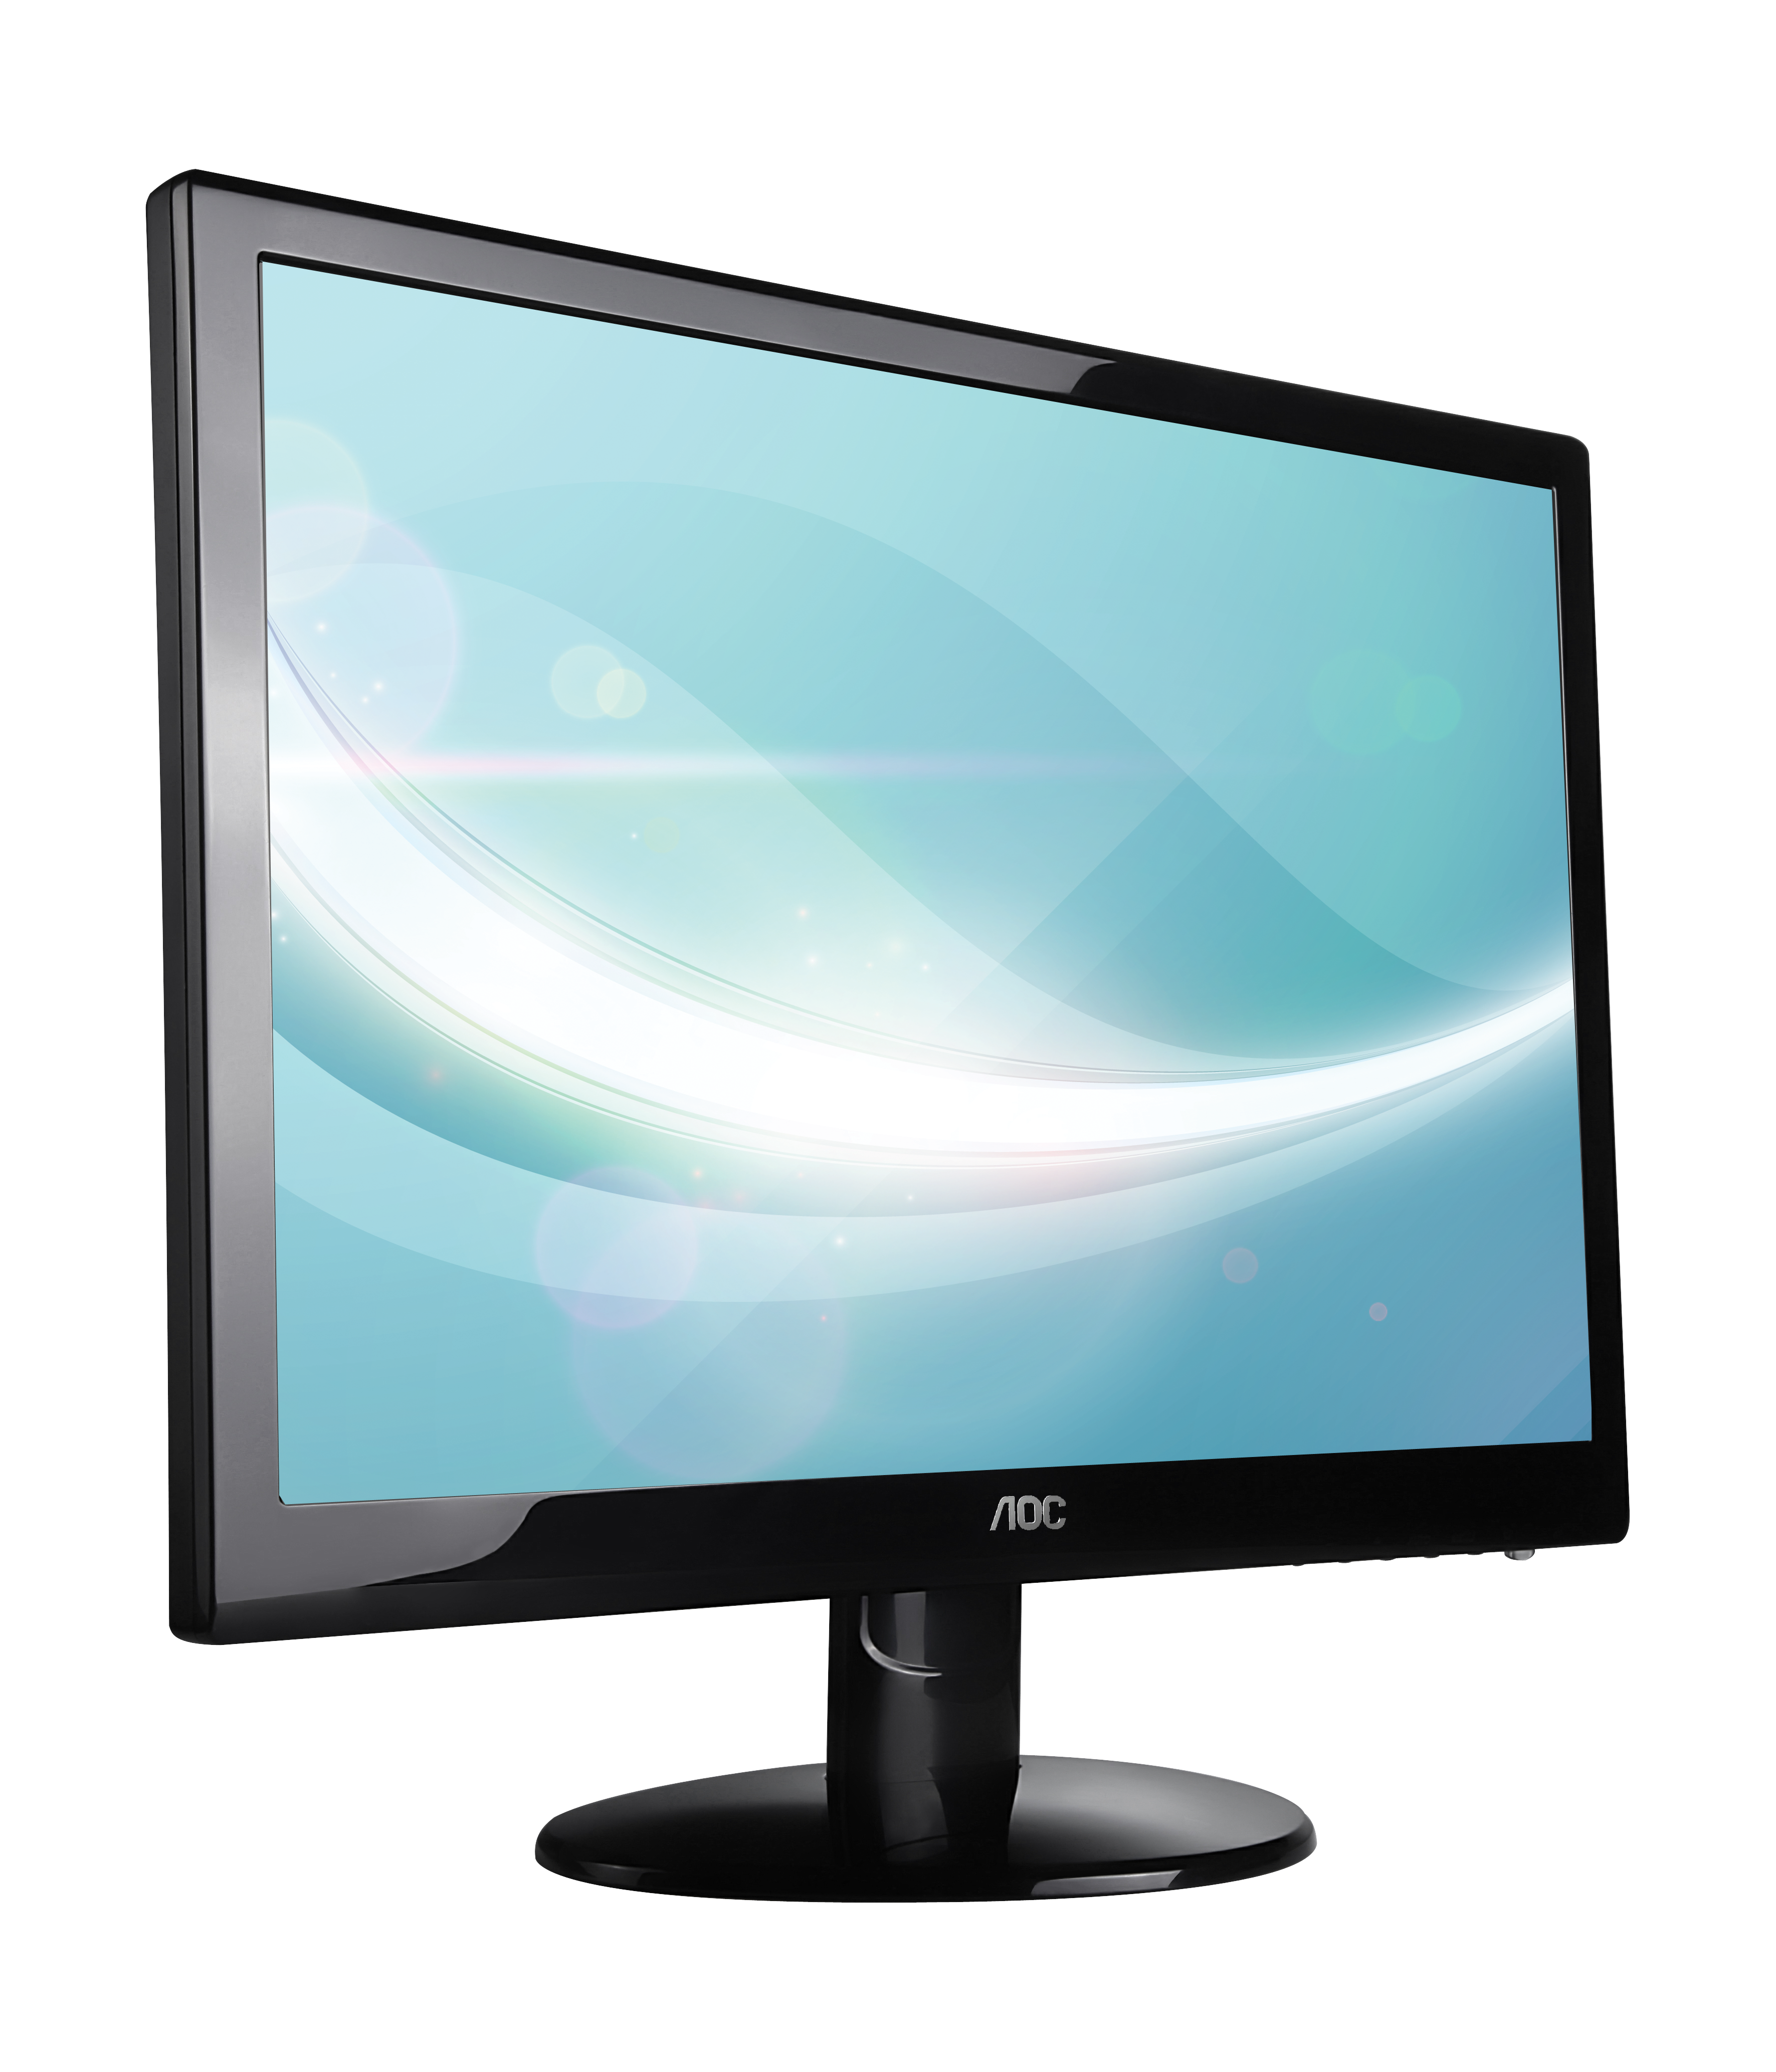 Monitor Hd Png Transparent Monitor Hdpng Images Pluspng